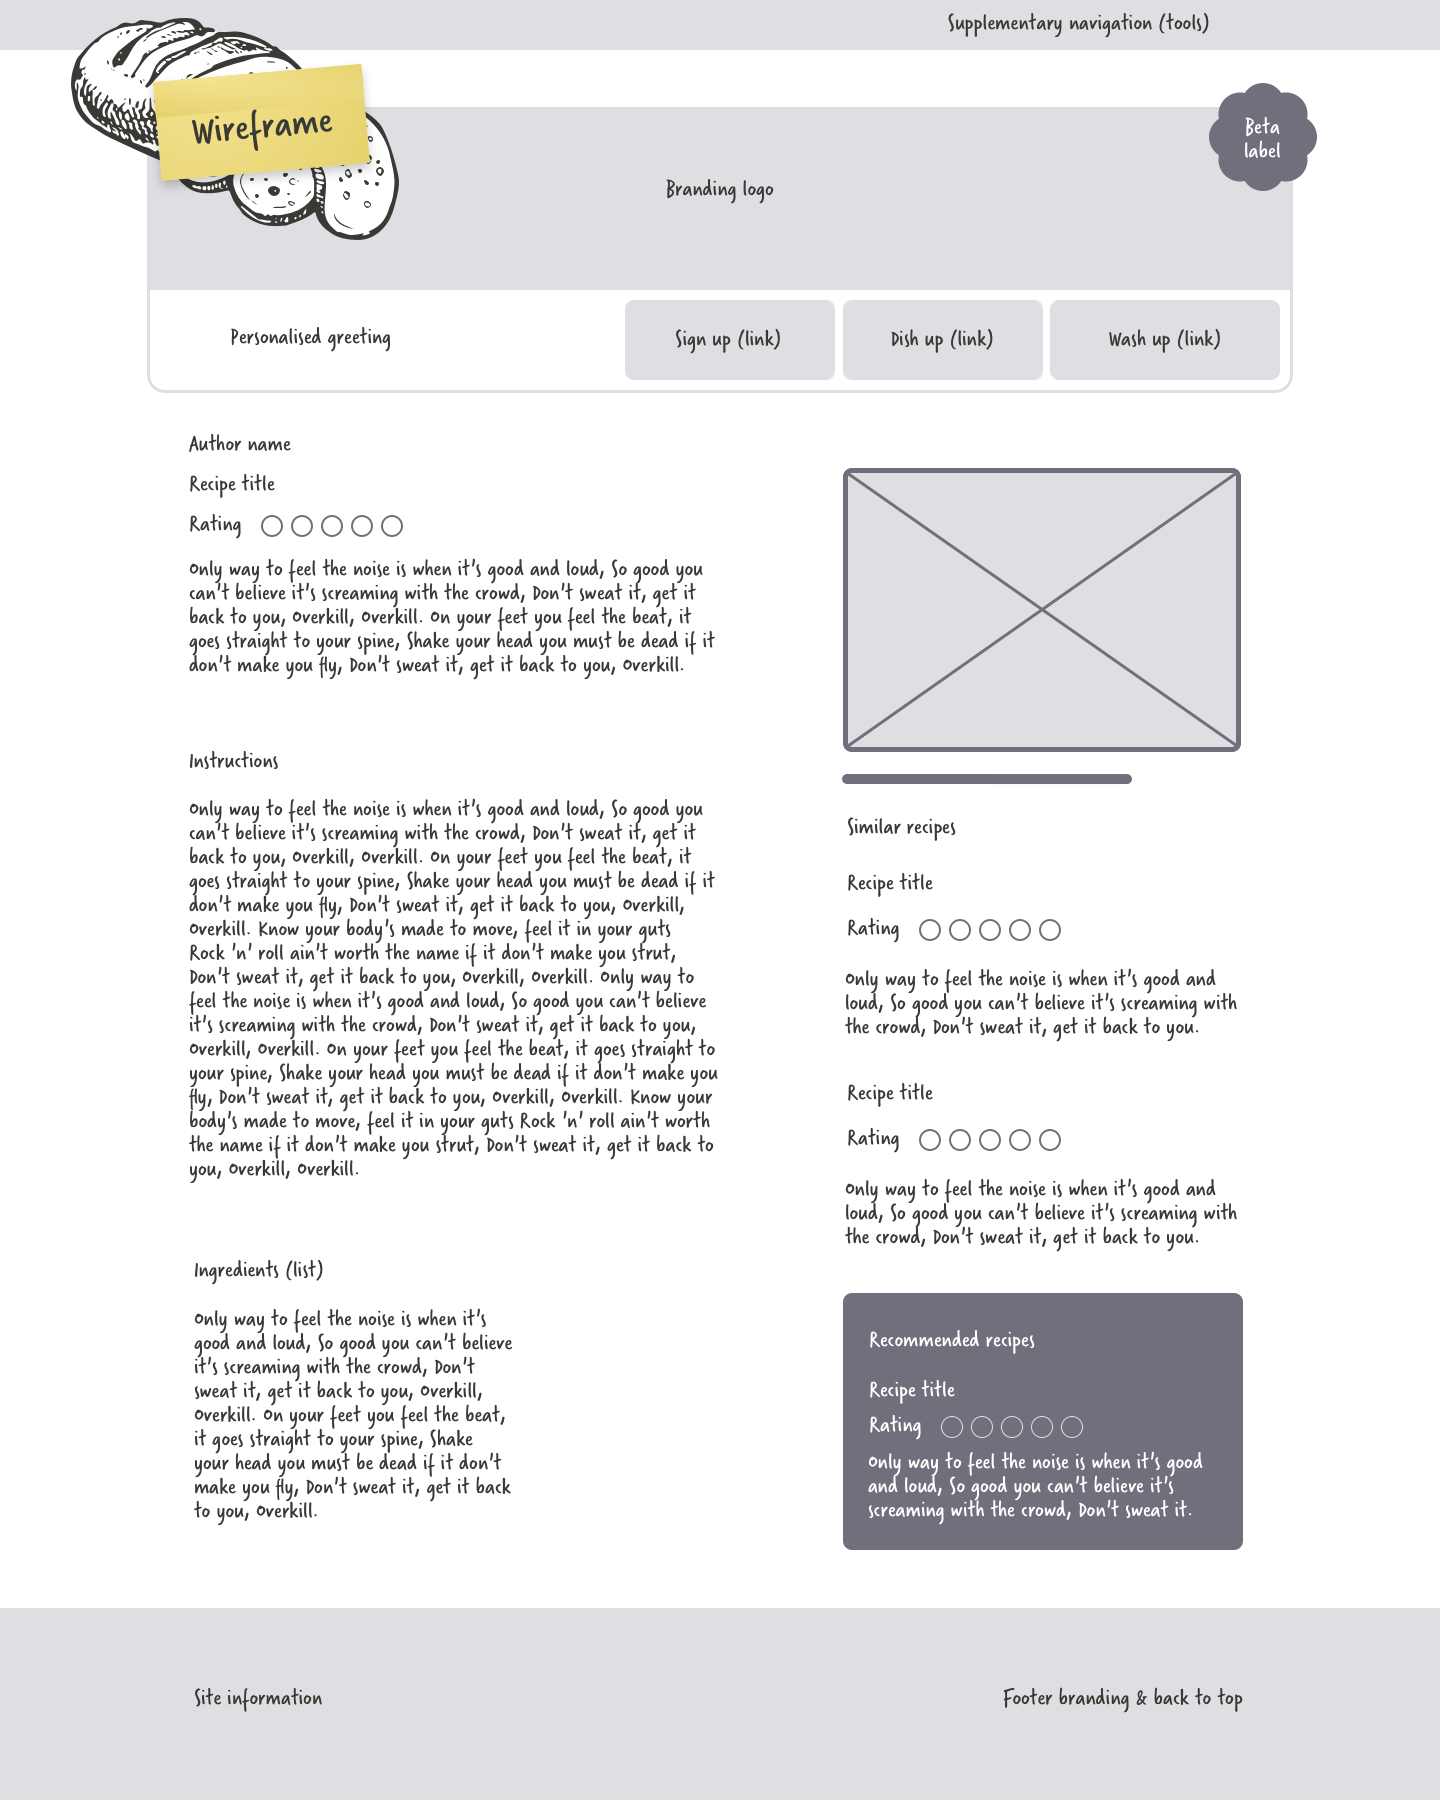 Wireframe of my design